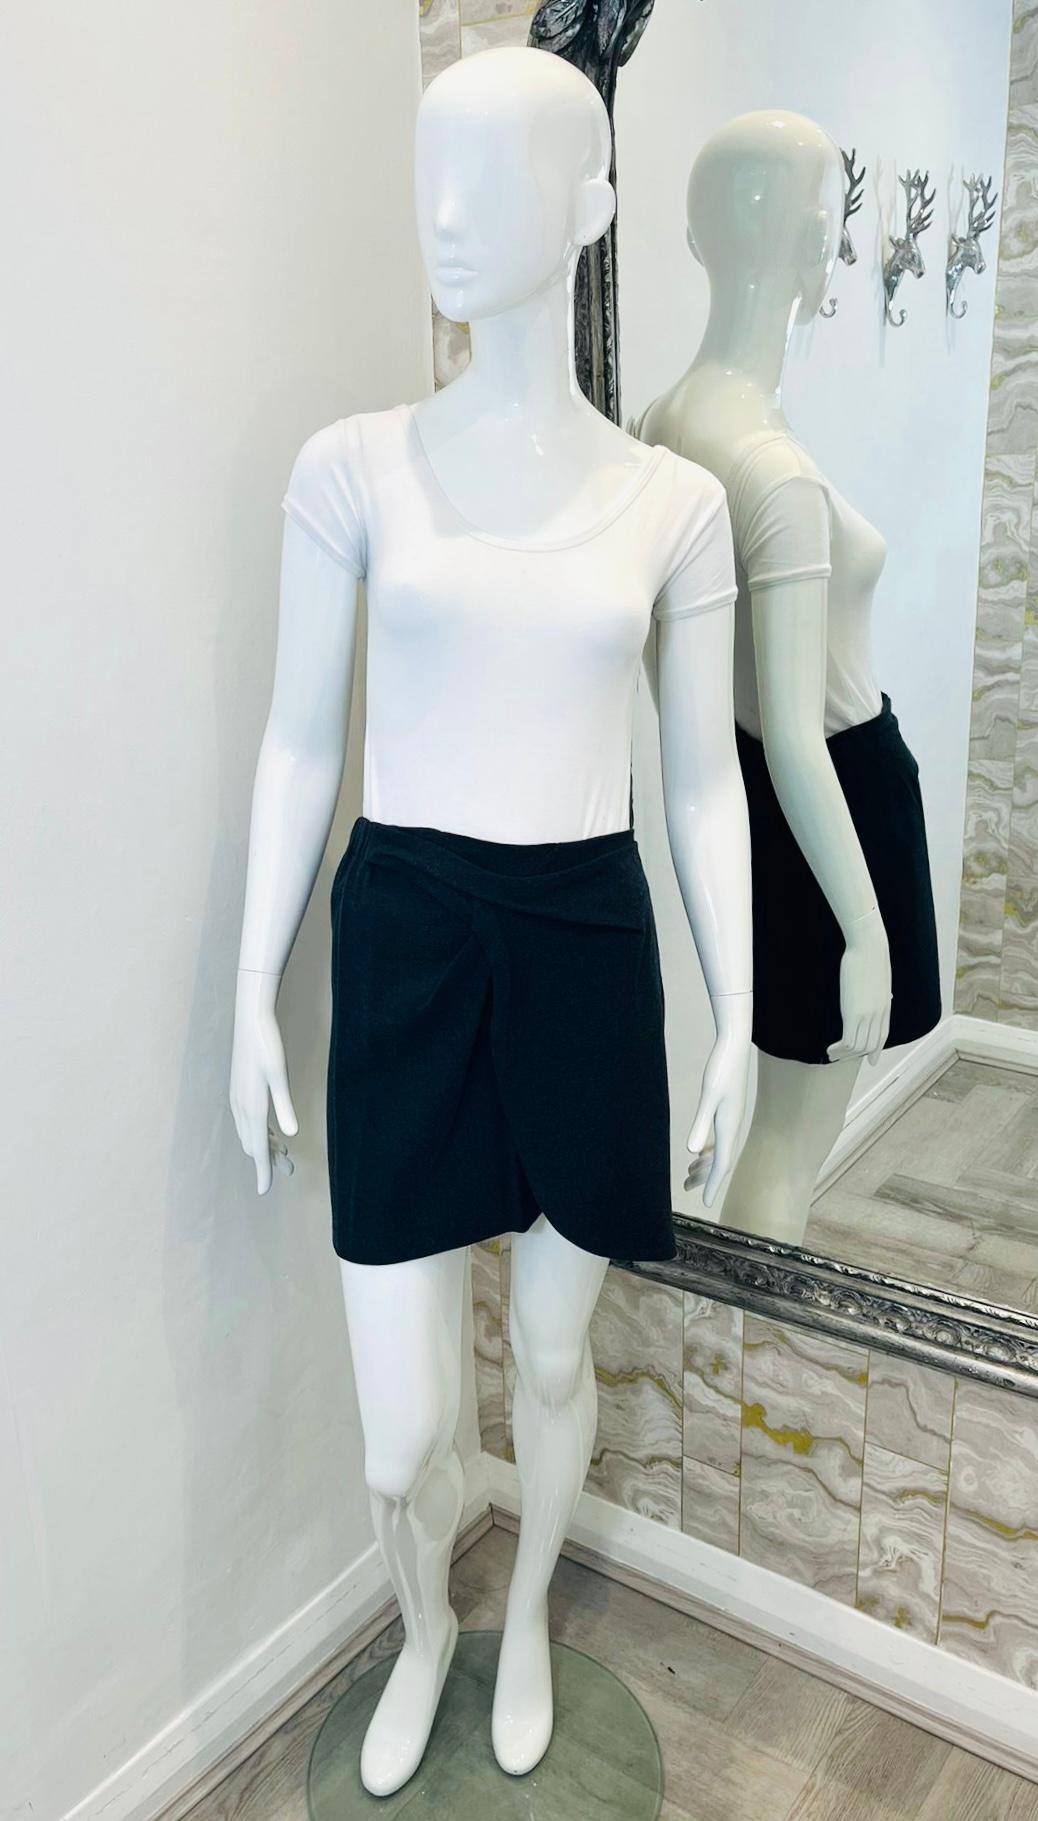 See By Chloe Wool Blend Mini Skirt

Dark grey skirt designed with wrap detailing to the side.

Featuring elasticated waistband to rear and slim silhouette.

Size – 42IT

Condition – Very Good

Composition – 68% Viscose, 29% Virgin Wool, 3% Elastane